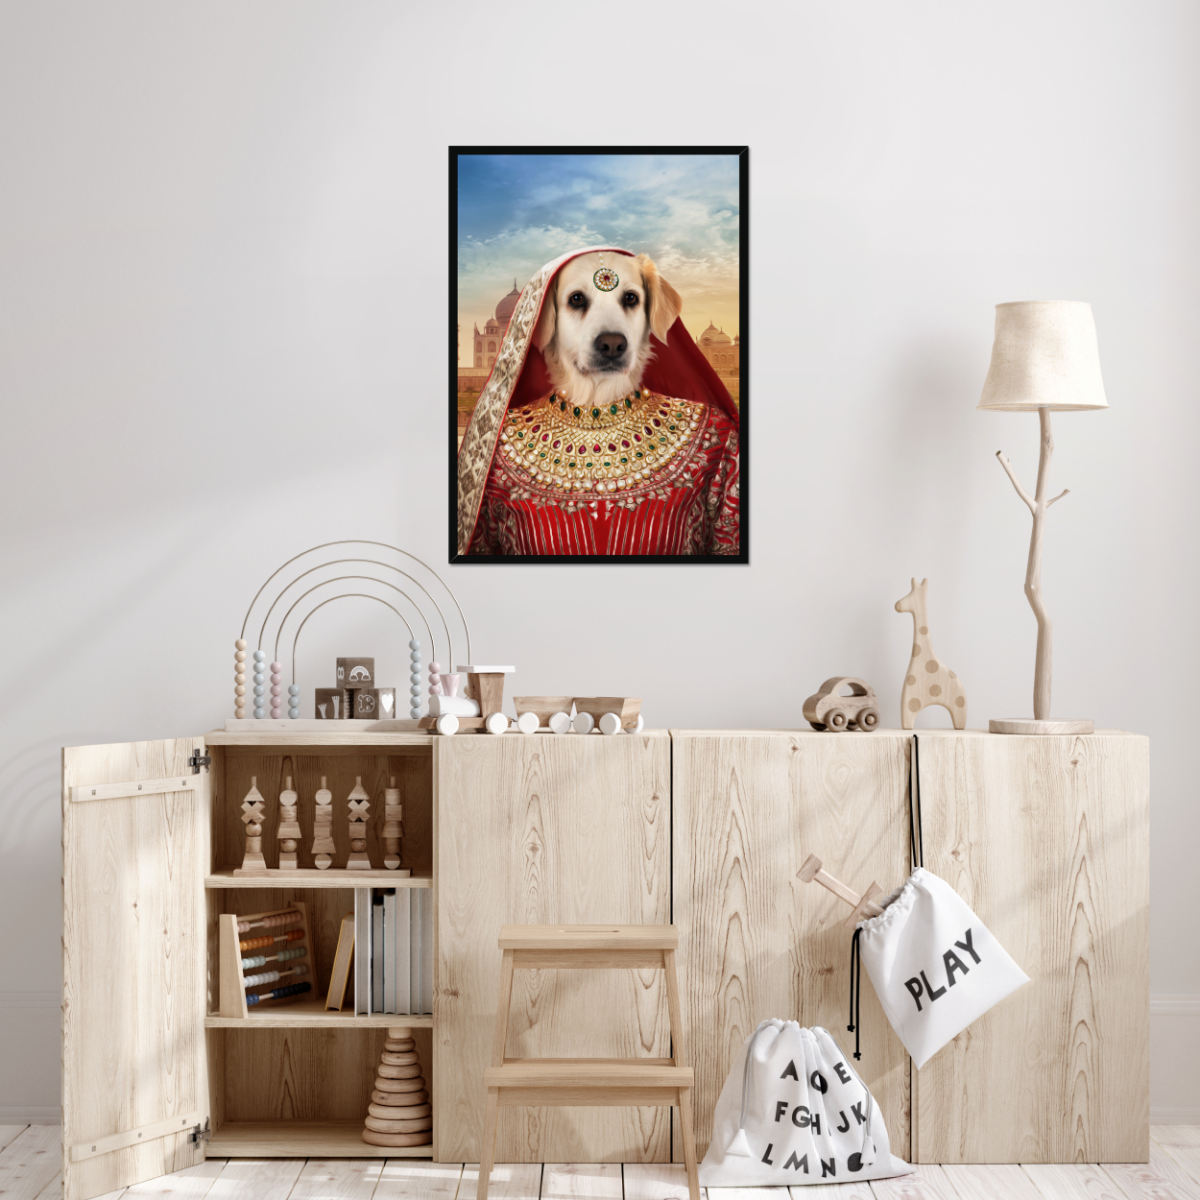 The Indian Rani: Custom Framed Pet Portrait - Paw & Glory, paw and glory, pet portraits victorian, cats in uniform, jedi dog portrait, painted dog canvas, framed pet portrait, pet pictures royal, pet portrait